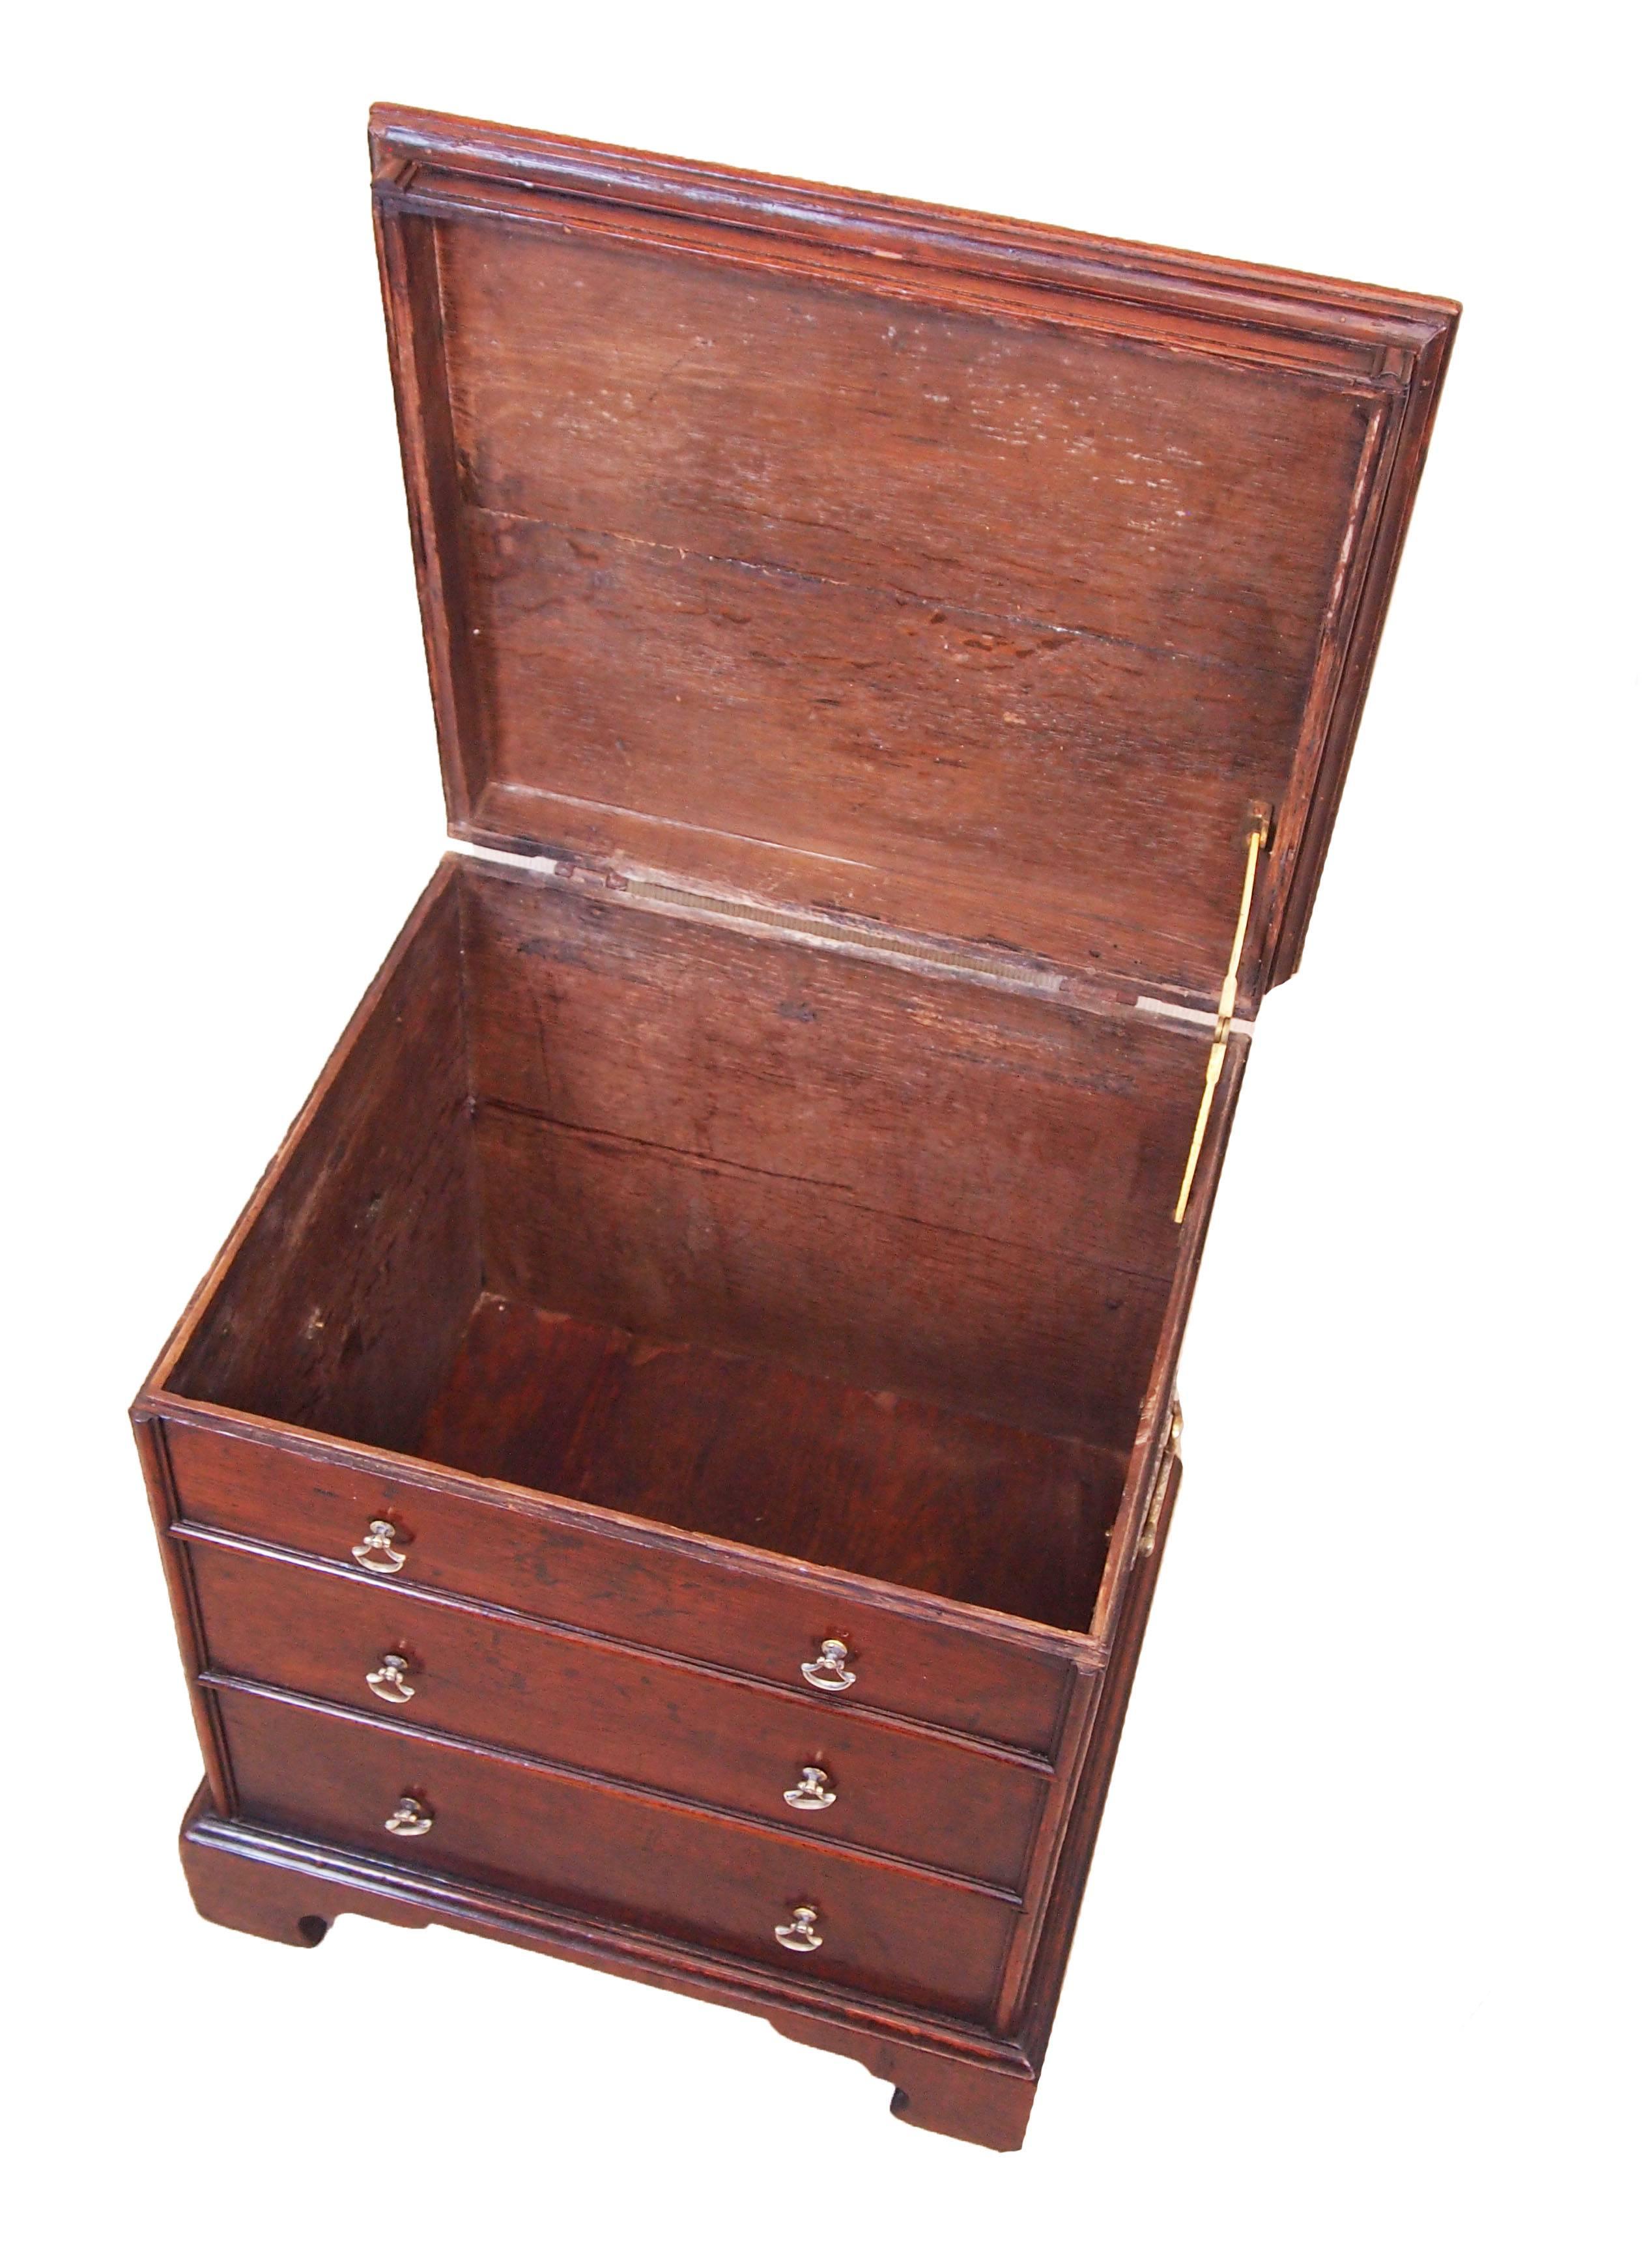 An attractive 18th century georgian oak converted box commode
of good colour and patina having lift up lid above three false
drawers flanked by original pierced carrying handles raised on
original bracket feet

(Dating from the mid 18th century